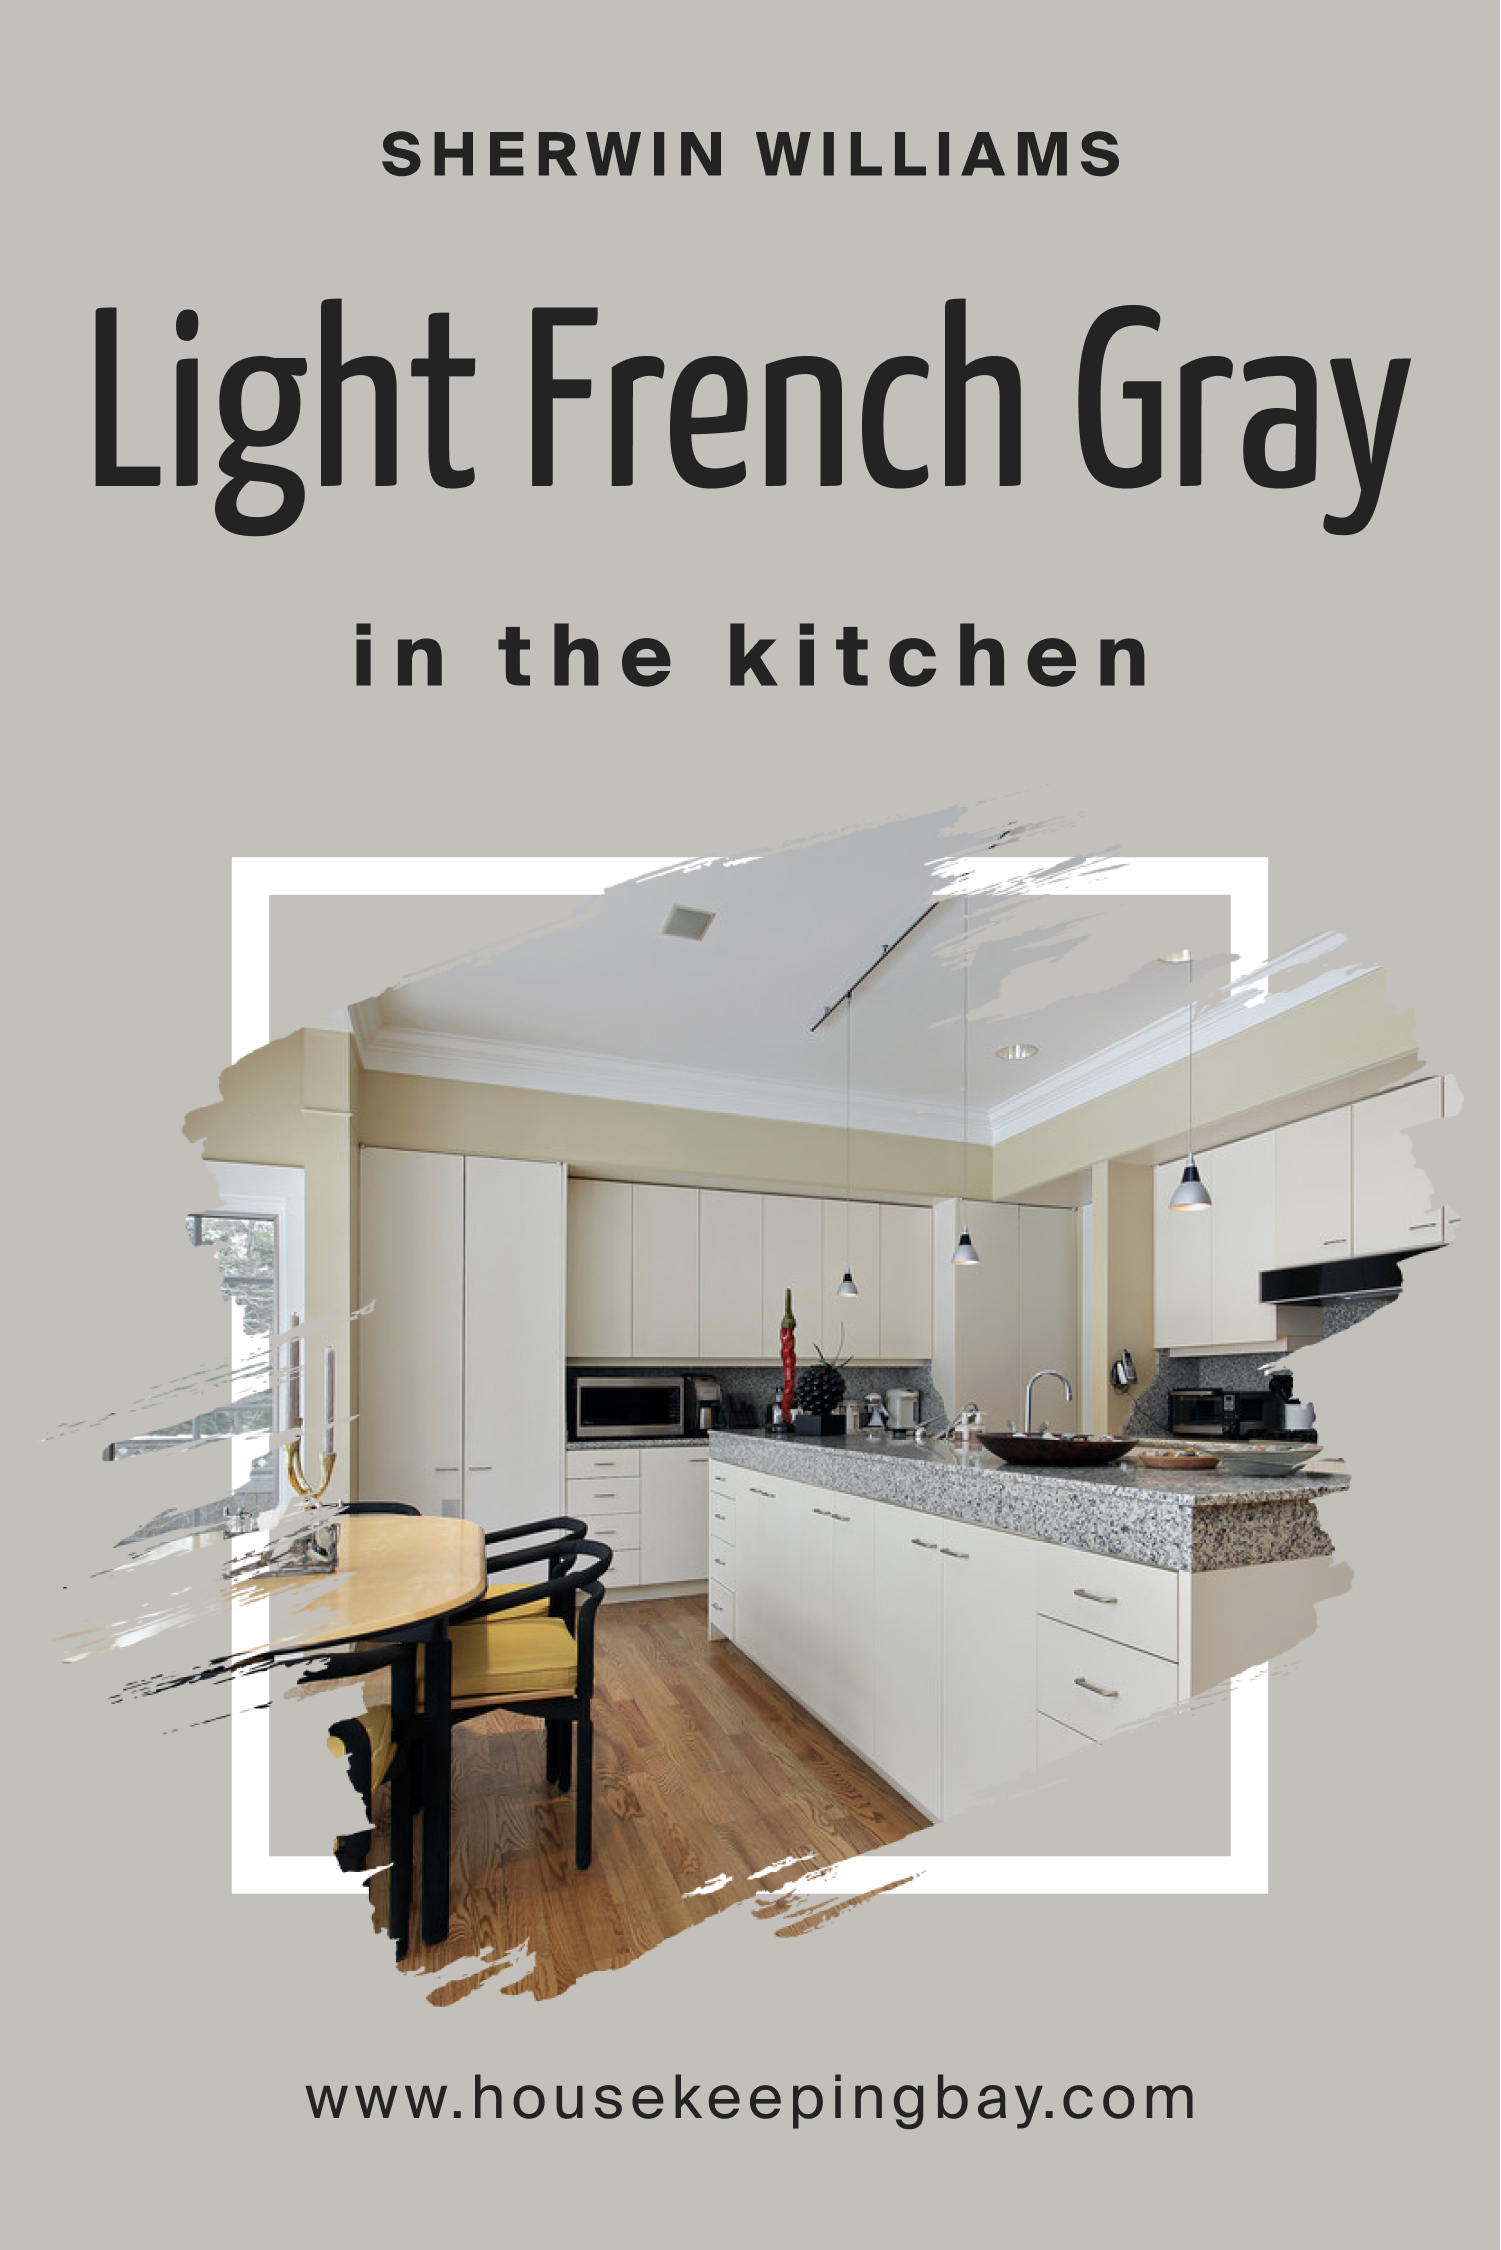 Sherwin Williams. Light French Gray For the kitchen